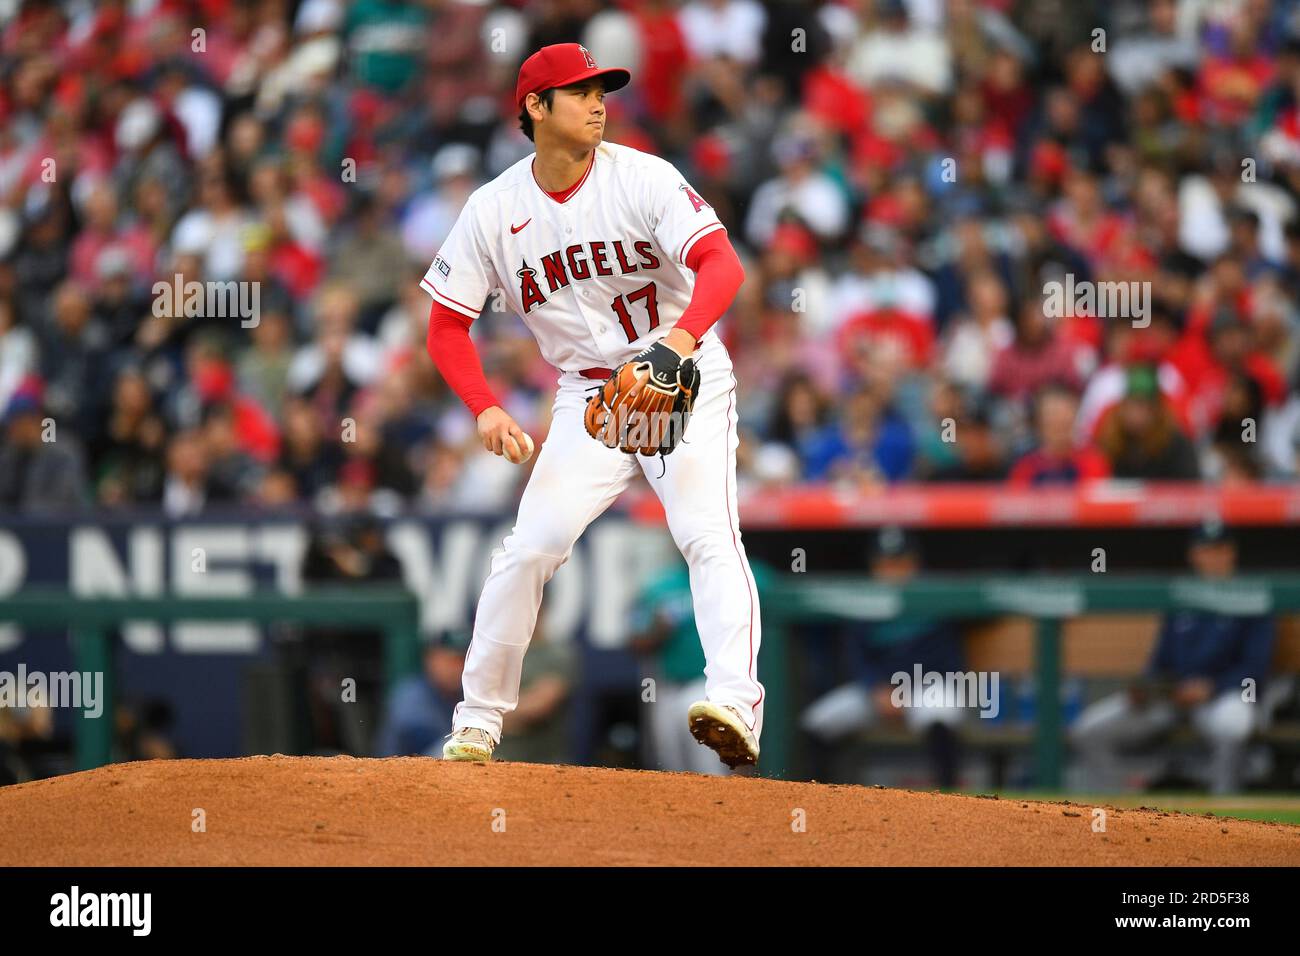 ANAHEIM, CA - JUNE 09: Los Angeles Angels pitcher Shohei Ohtani (17) throws  a pitch during the MLB game between the Seattle Mariners and the Los  Angeles Angels of Anaheim on June